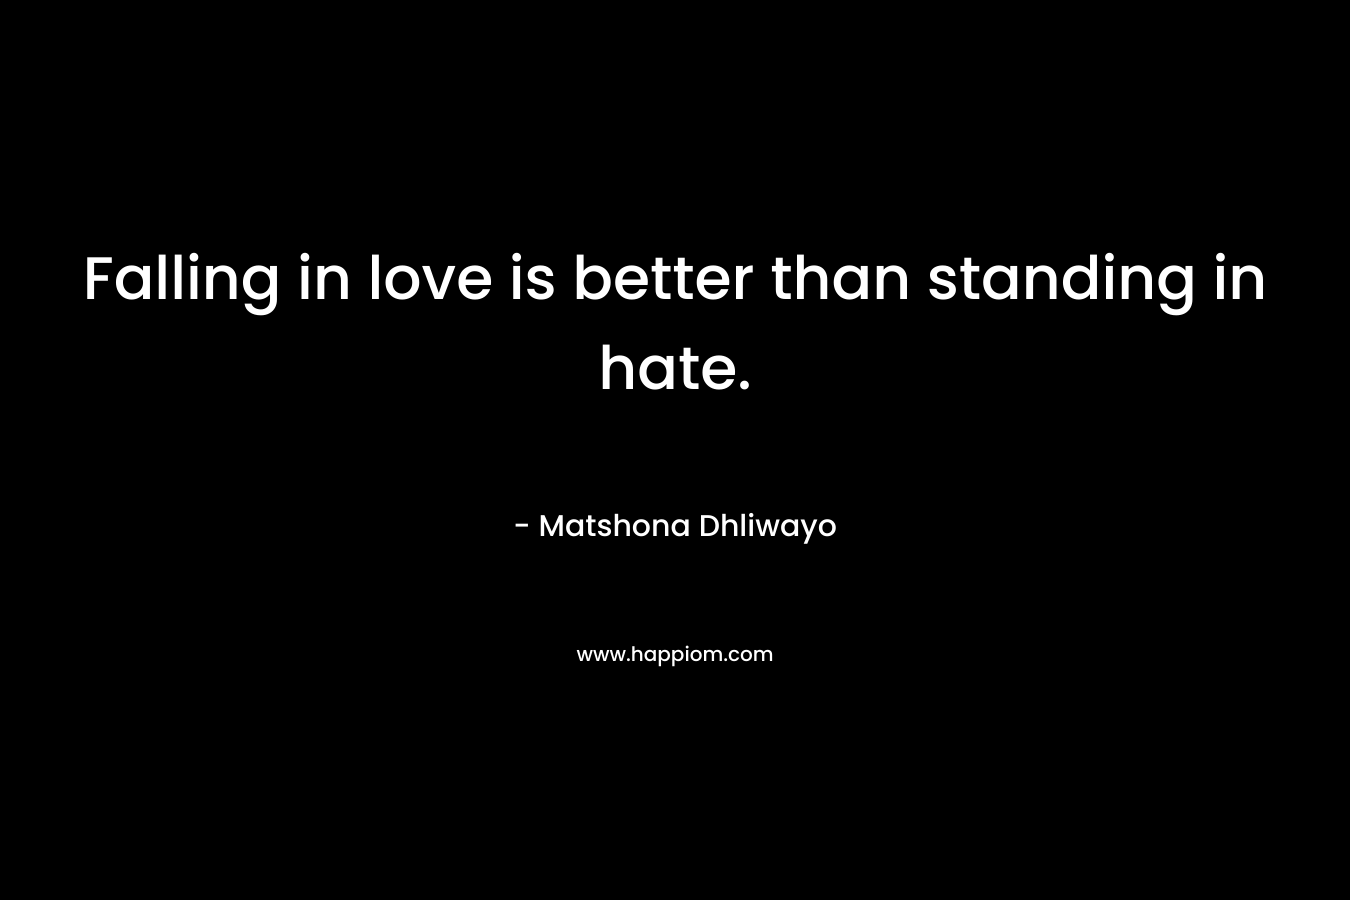 Falling in love is better than standing in hate. – Matshona Dhliwayo